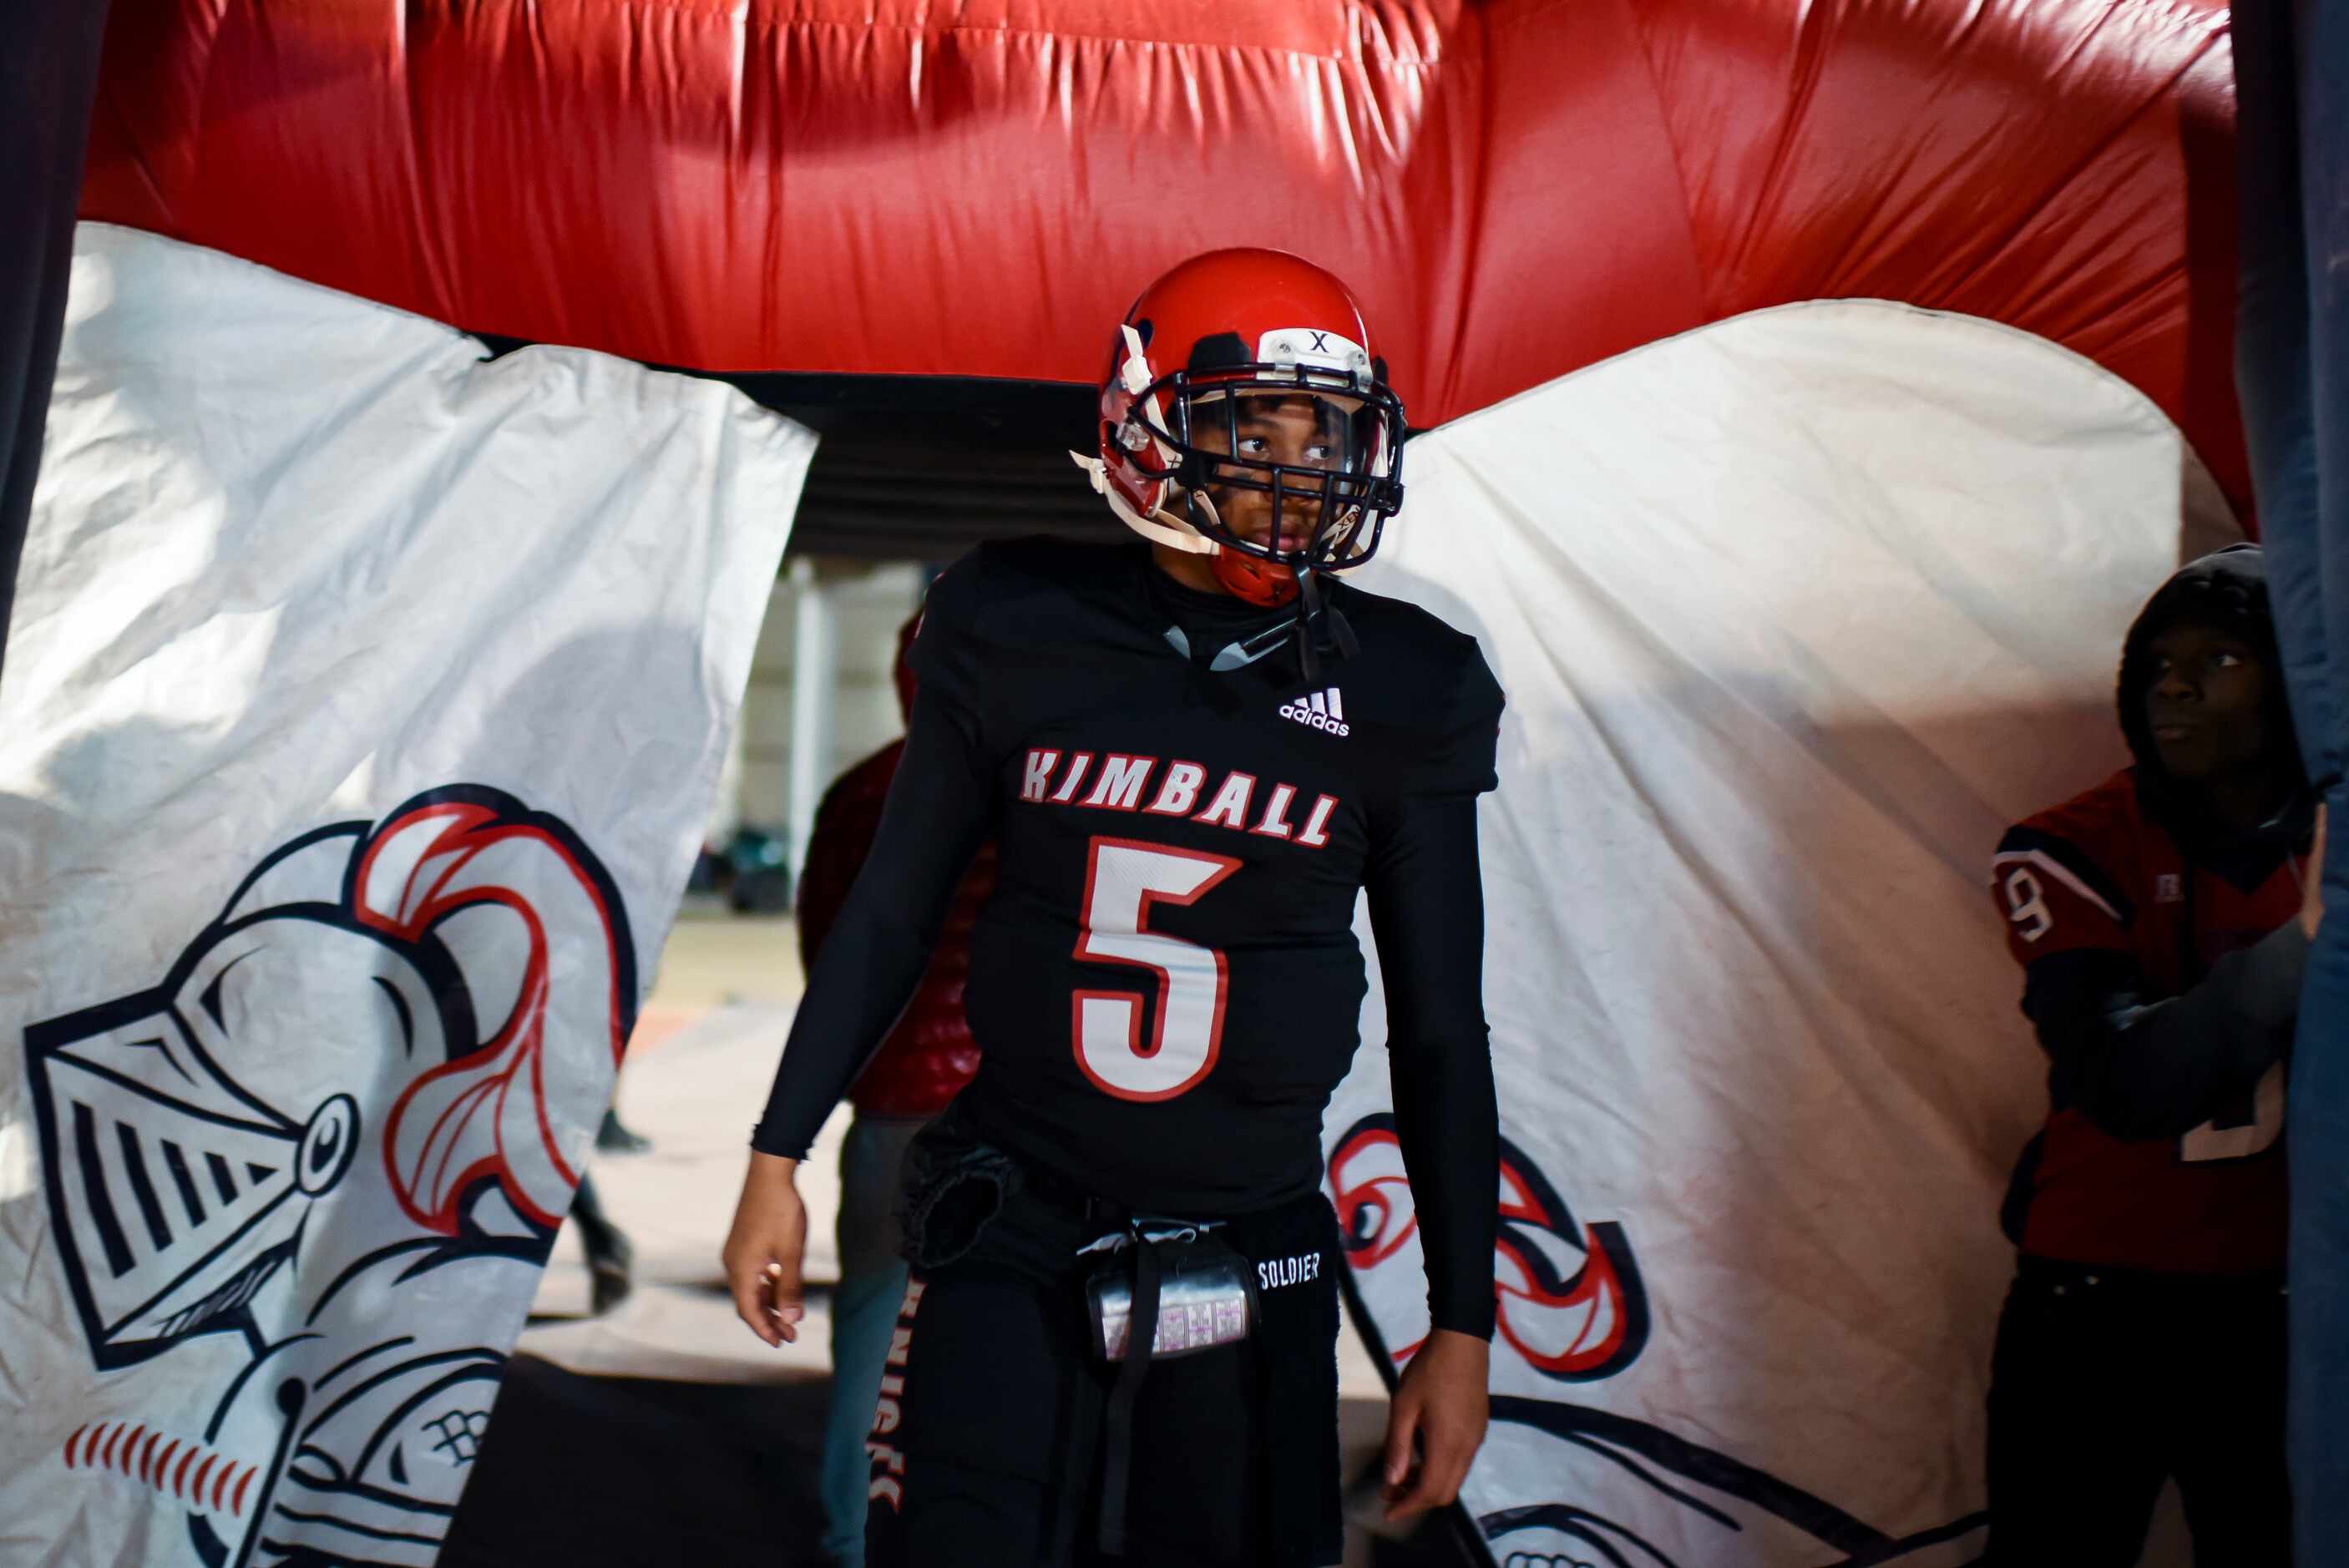 Kimball sophomore Jacarion Sauls (5) walks onto the field prior to the start of the District...